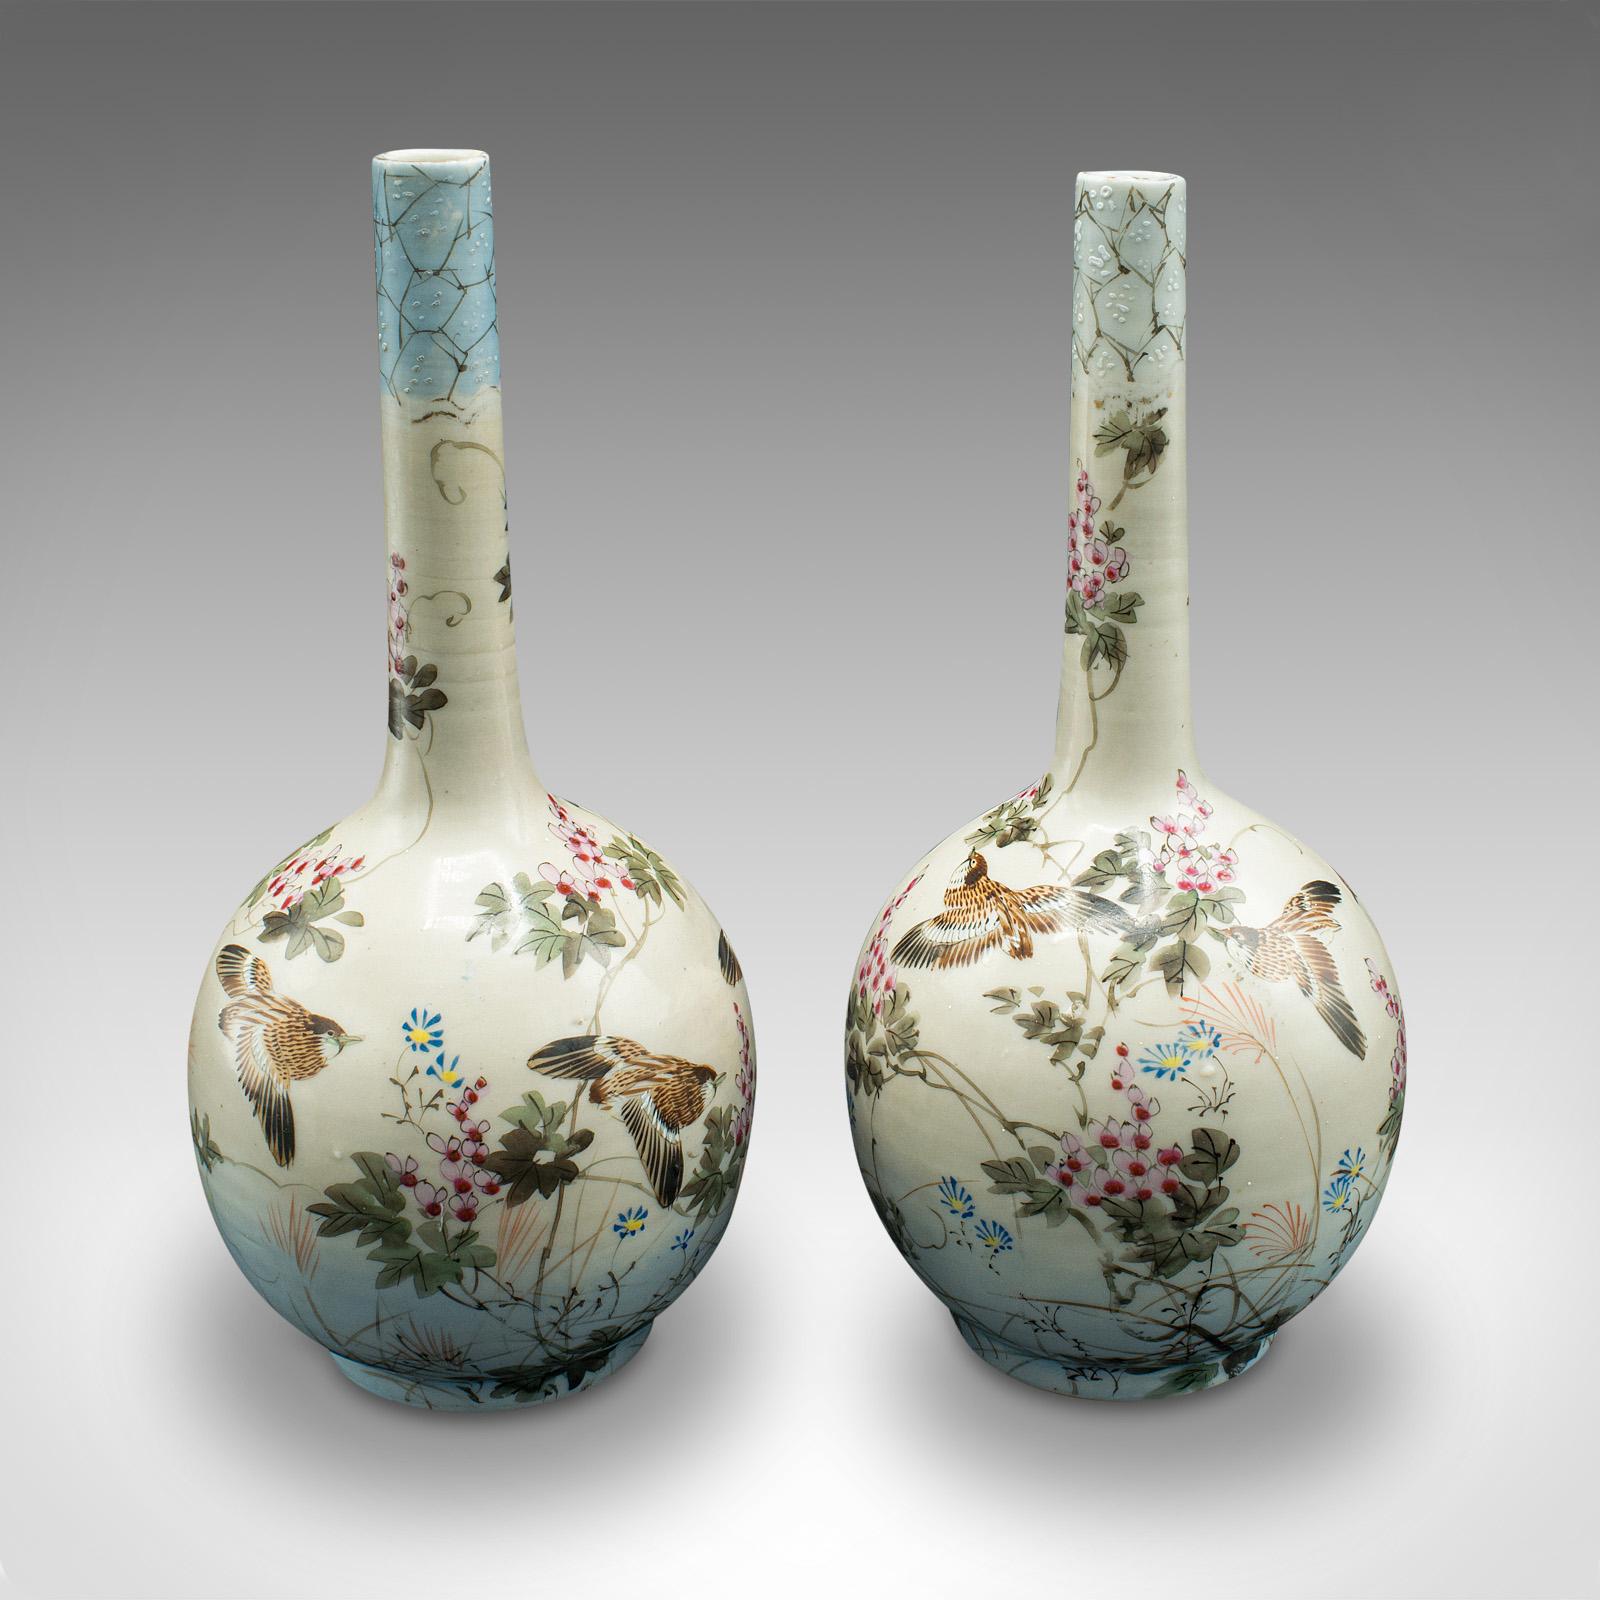 This is a pair of antique single stem vases. A Japanese, hand-painted ceramic baluster flower urn, dating to the Victorian period, circa 1880.

Delicately hand-painted decor from the early Meiji period
Displaying a desirable aged patina and in good